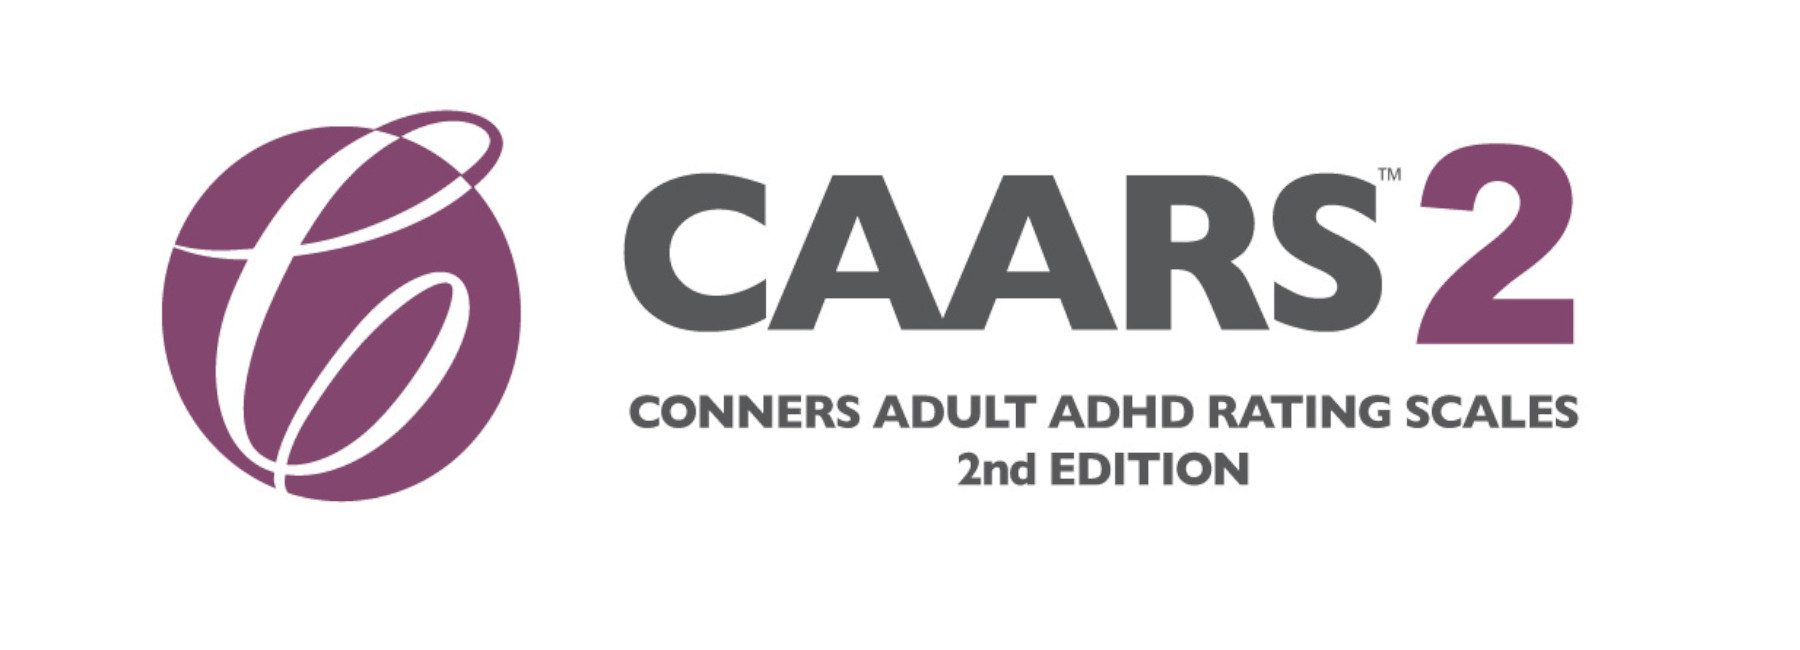 CAARS2 CONNERS ADULT ADHD RATING SCALES 2nd EDITION